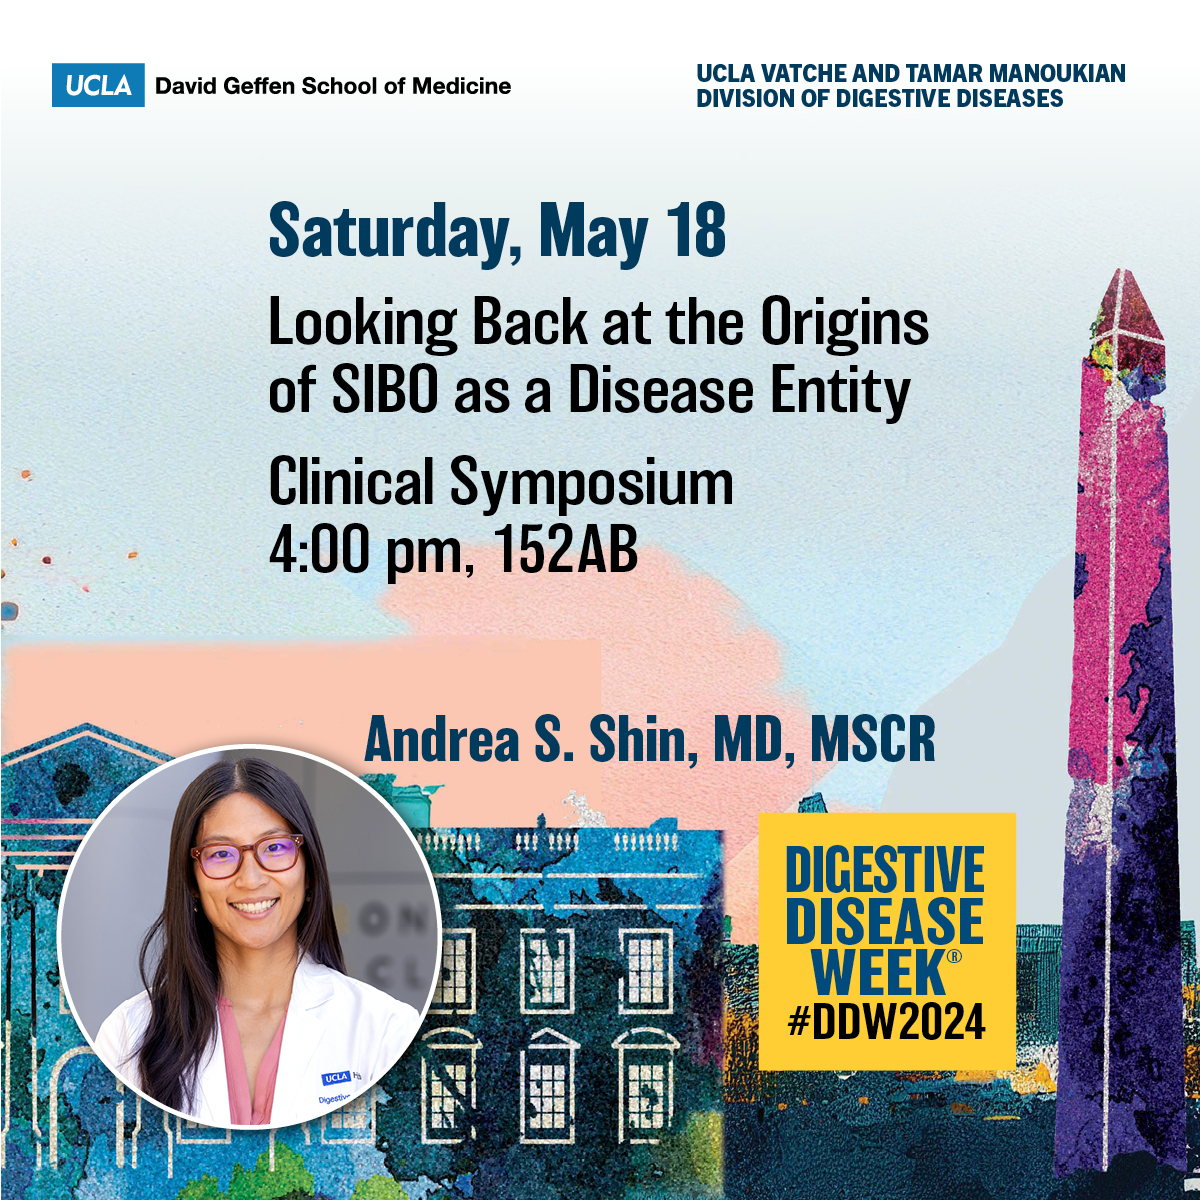 Don't miss this #DDW2024 Clinical Symposium!

Looking Back at the Origins of Small Intestinal Bacterial Overgrowth (#SIBO) as a Disease Entity

🗣️@AndreaShin_GI
➡️Saturday, May 18, 4:00 pm, 152AB